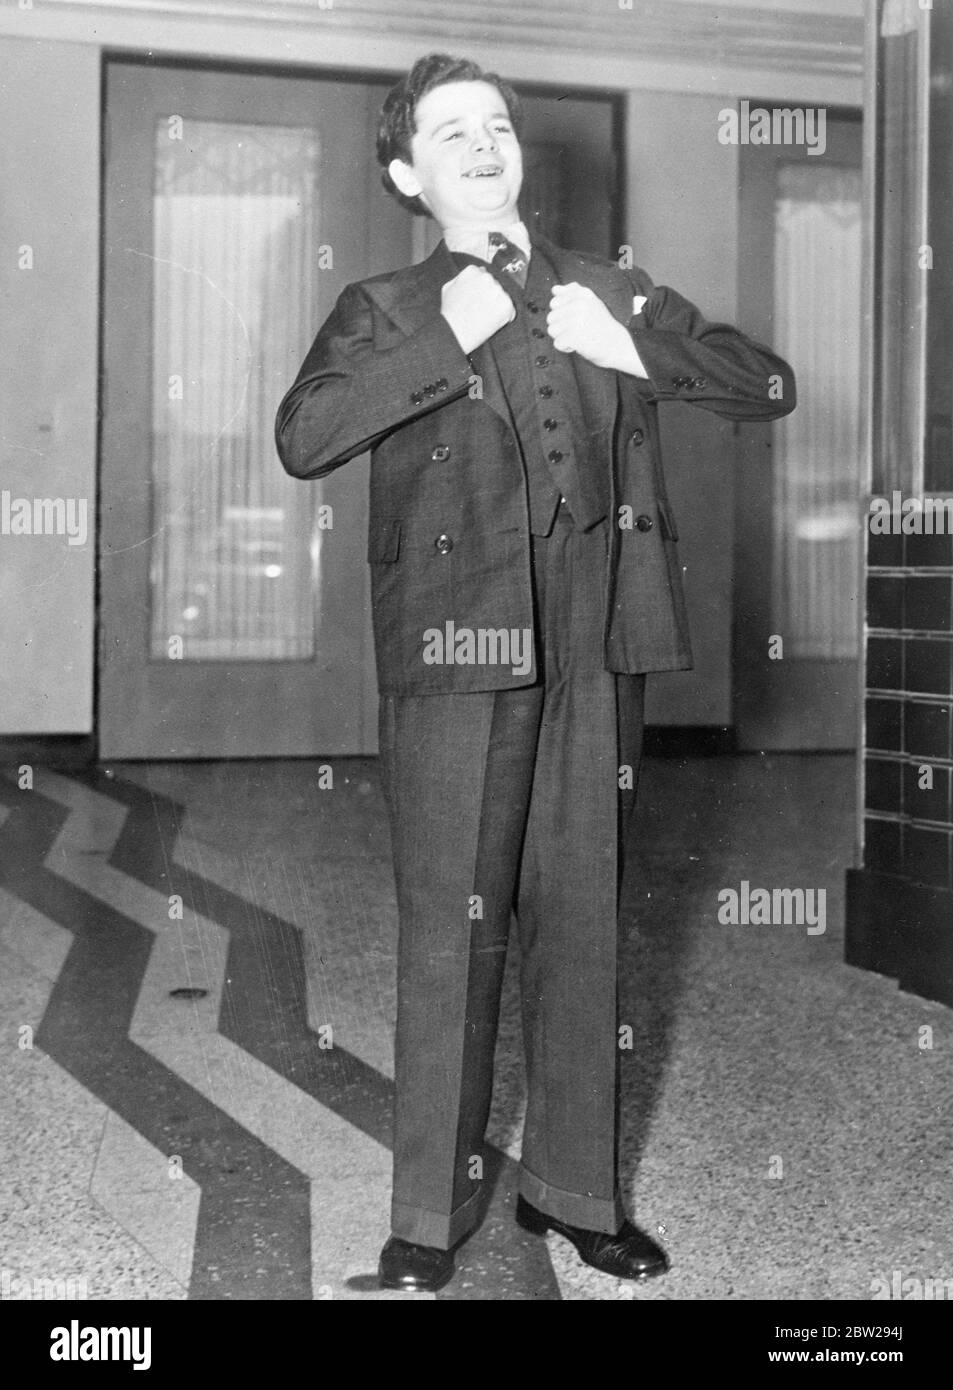 Freddie Bartholomew showrooms long trousers and manly pride. Freddie Bartholomew, the young film actor, who had been the subject of long drawnout litigation in the American courts, thrust out his chest and laughs in manly fashion after donning his first pair of long trousers. To celebrate the occasion, Freddie attended the premiere of Greta Garbo's new film 'Conquest 'in Los Angeles. 1 November 1937 Stock Photo